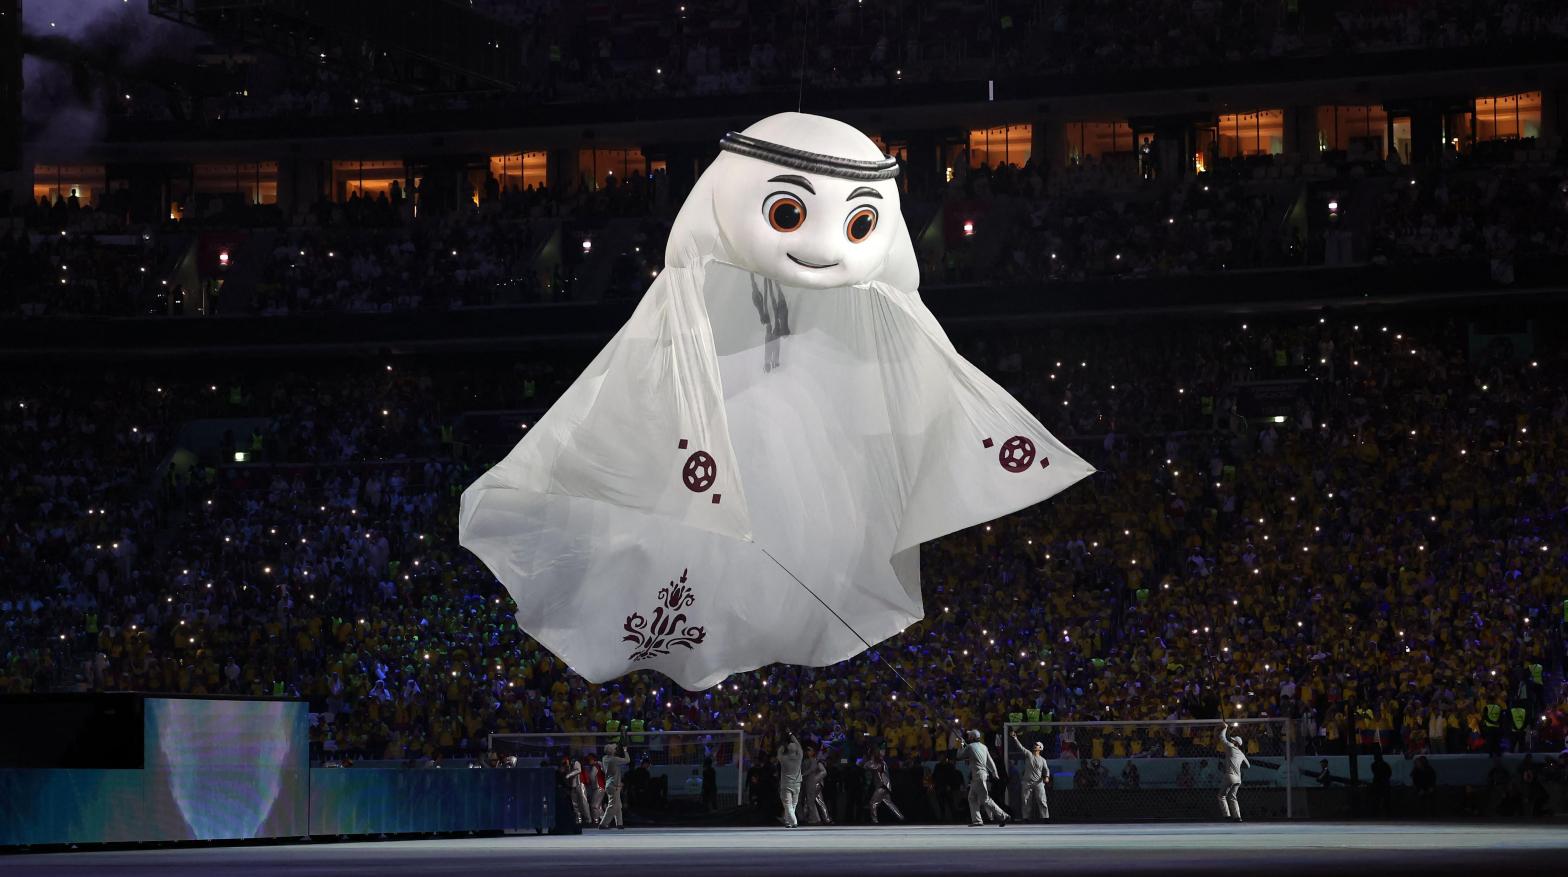 The Qatar 2022 mascot La'eeb performs during the opening ceremony ahead of the Qatar 2022 World Cup (Photo: KARIM JAAFAR / AFP, Getty Images)